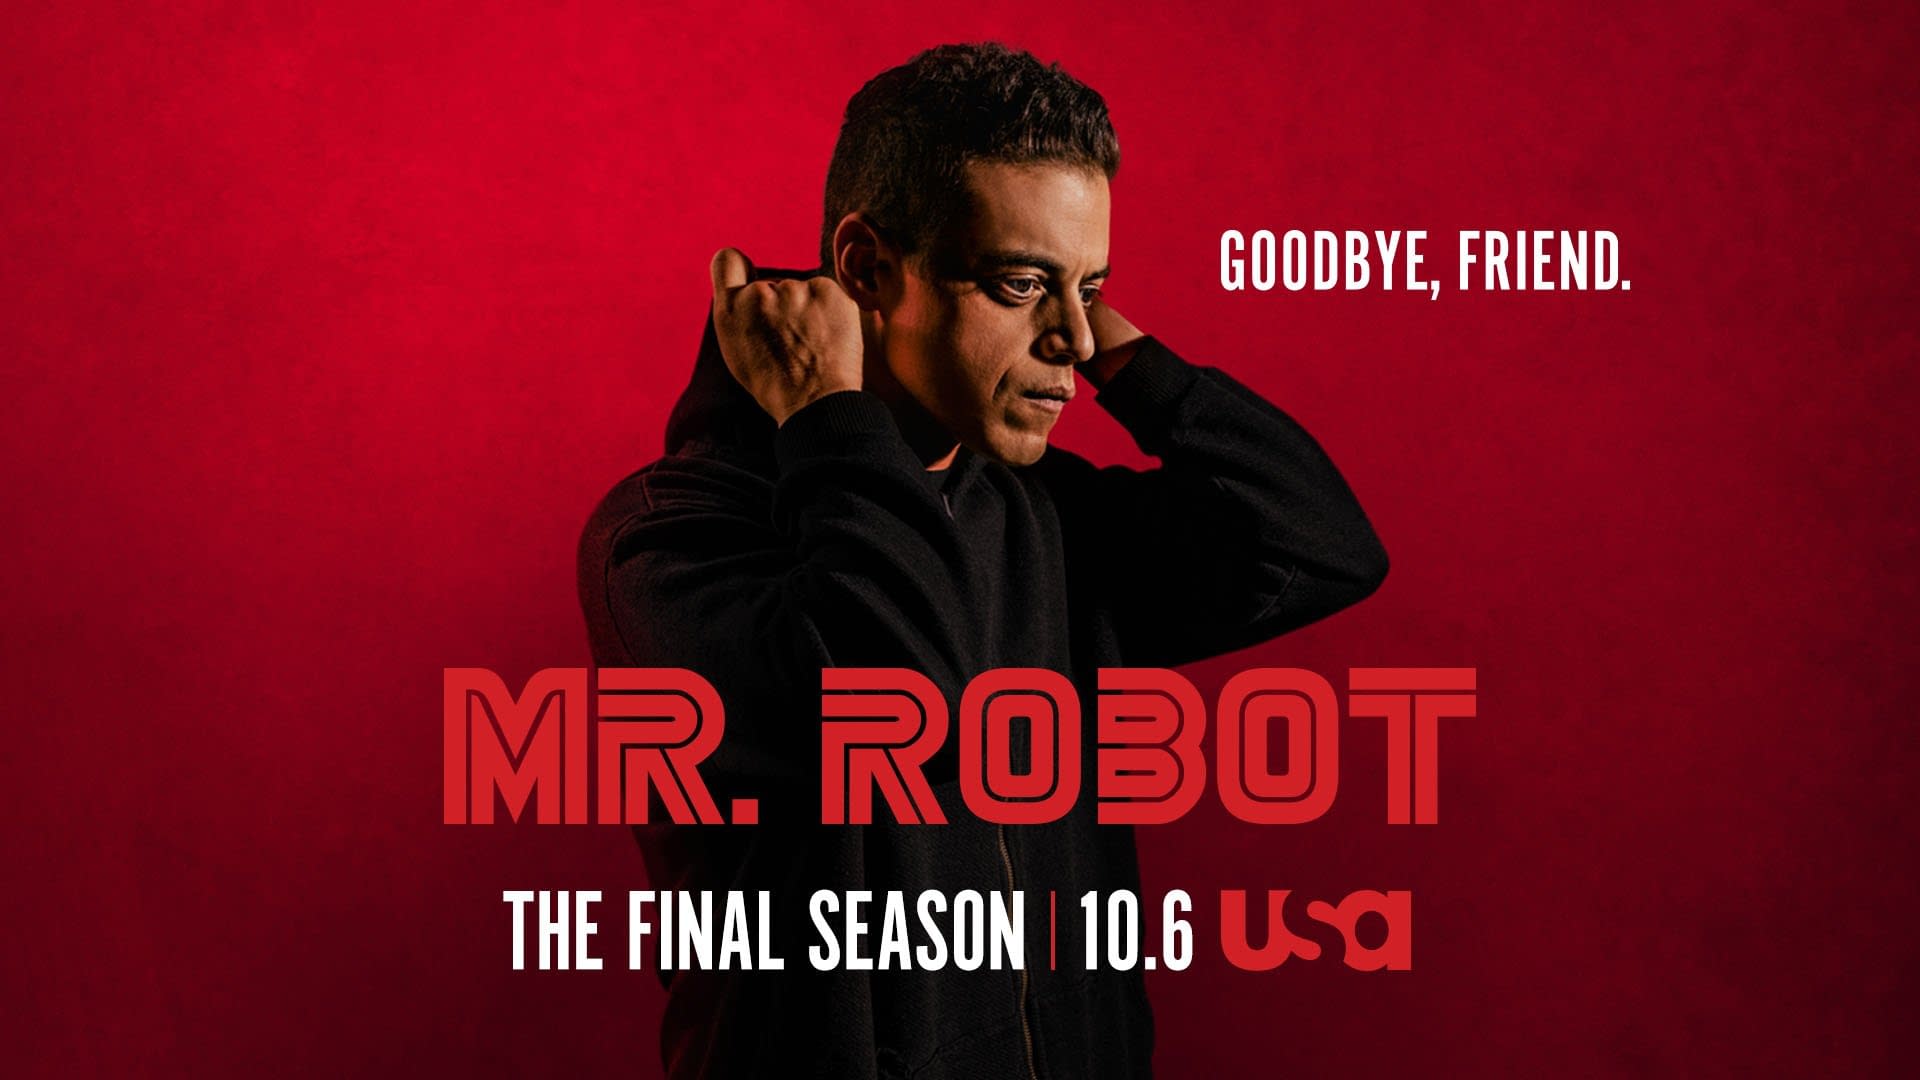 Mr. Robot": Our Final Gifts Are Too of a Good Thing [OPINION]